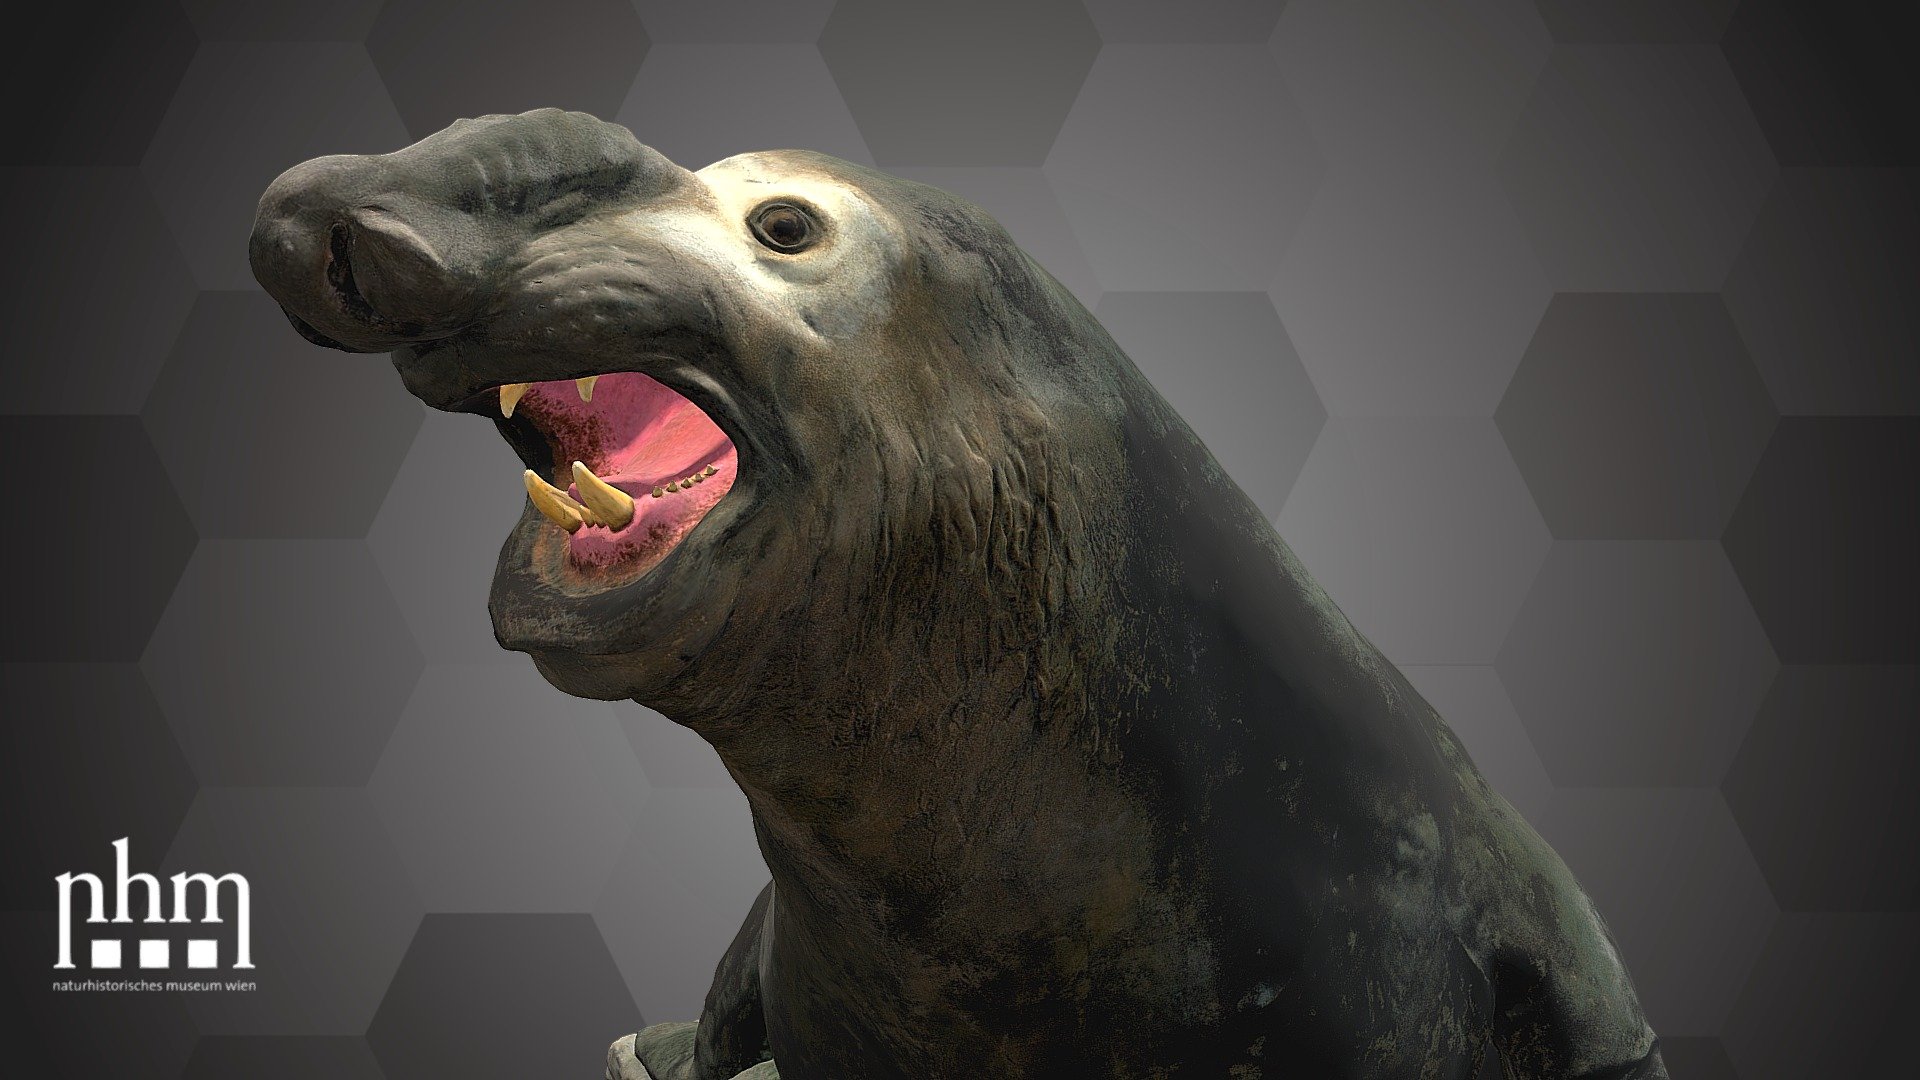 3D scan of the southern elephant seal, Mirounga leoninae. This specimen is from the Falkland Islands in the South Atlantic Ocean and became part of the collection of the NHM Vienna in 1901. Very few museums own a specimen this large, even fewer have one that is more than 100-years-old! 

The southern elephant seal is Number 86 of the NHM Top 100 and can be found in Hall 34 of the NHM Vienna next to Steller’s sea cow.

Specimen: Mirounga leoninae (Linnaeus, 1758)

Inventory number: NHMW-Zoo-MAMM 18460

Collection: Natural History Museum Vienna, 1st Zoological Dept., Mammal Coll. (curator: Frank E. Zachos)

Find out more about the NHMW here.

Scanned and edited by Anna Haider &amp; Viola Winkler (NHM Wien)

Scanner: Artec Leo. Infrastructure funded by the FFG 3d model